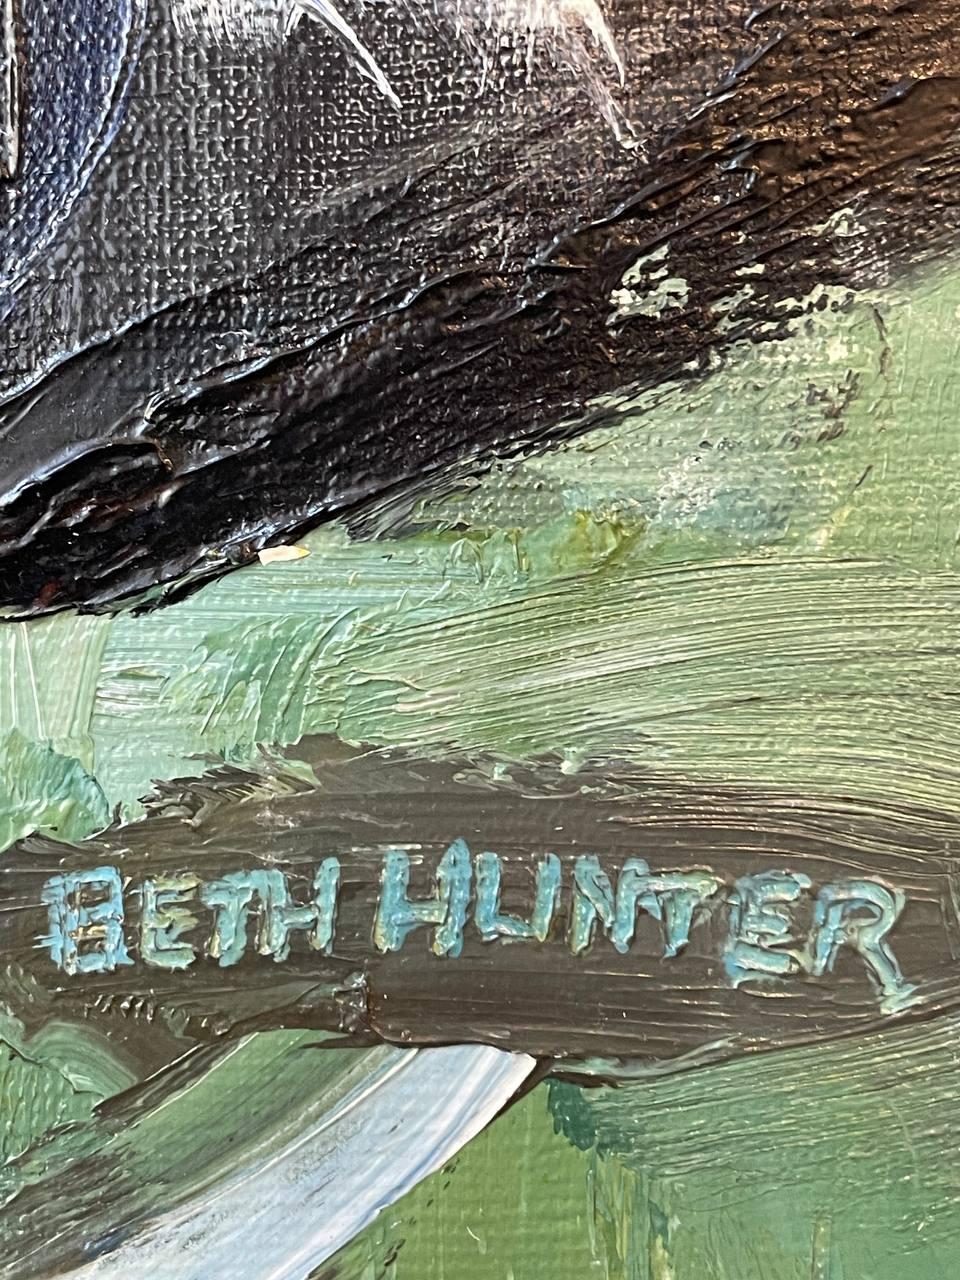 BETH HUNTER RWA (b. 1935)
Elizabeth Hunter was a British 20th century painter and printmaker who trained at the Slade School of Art under Lucian Freud. She lived in Bristol and Newlyn, but is thought to have exhibited in Scotland, where examples of